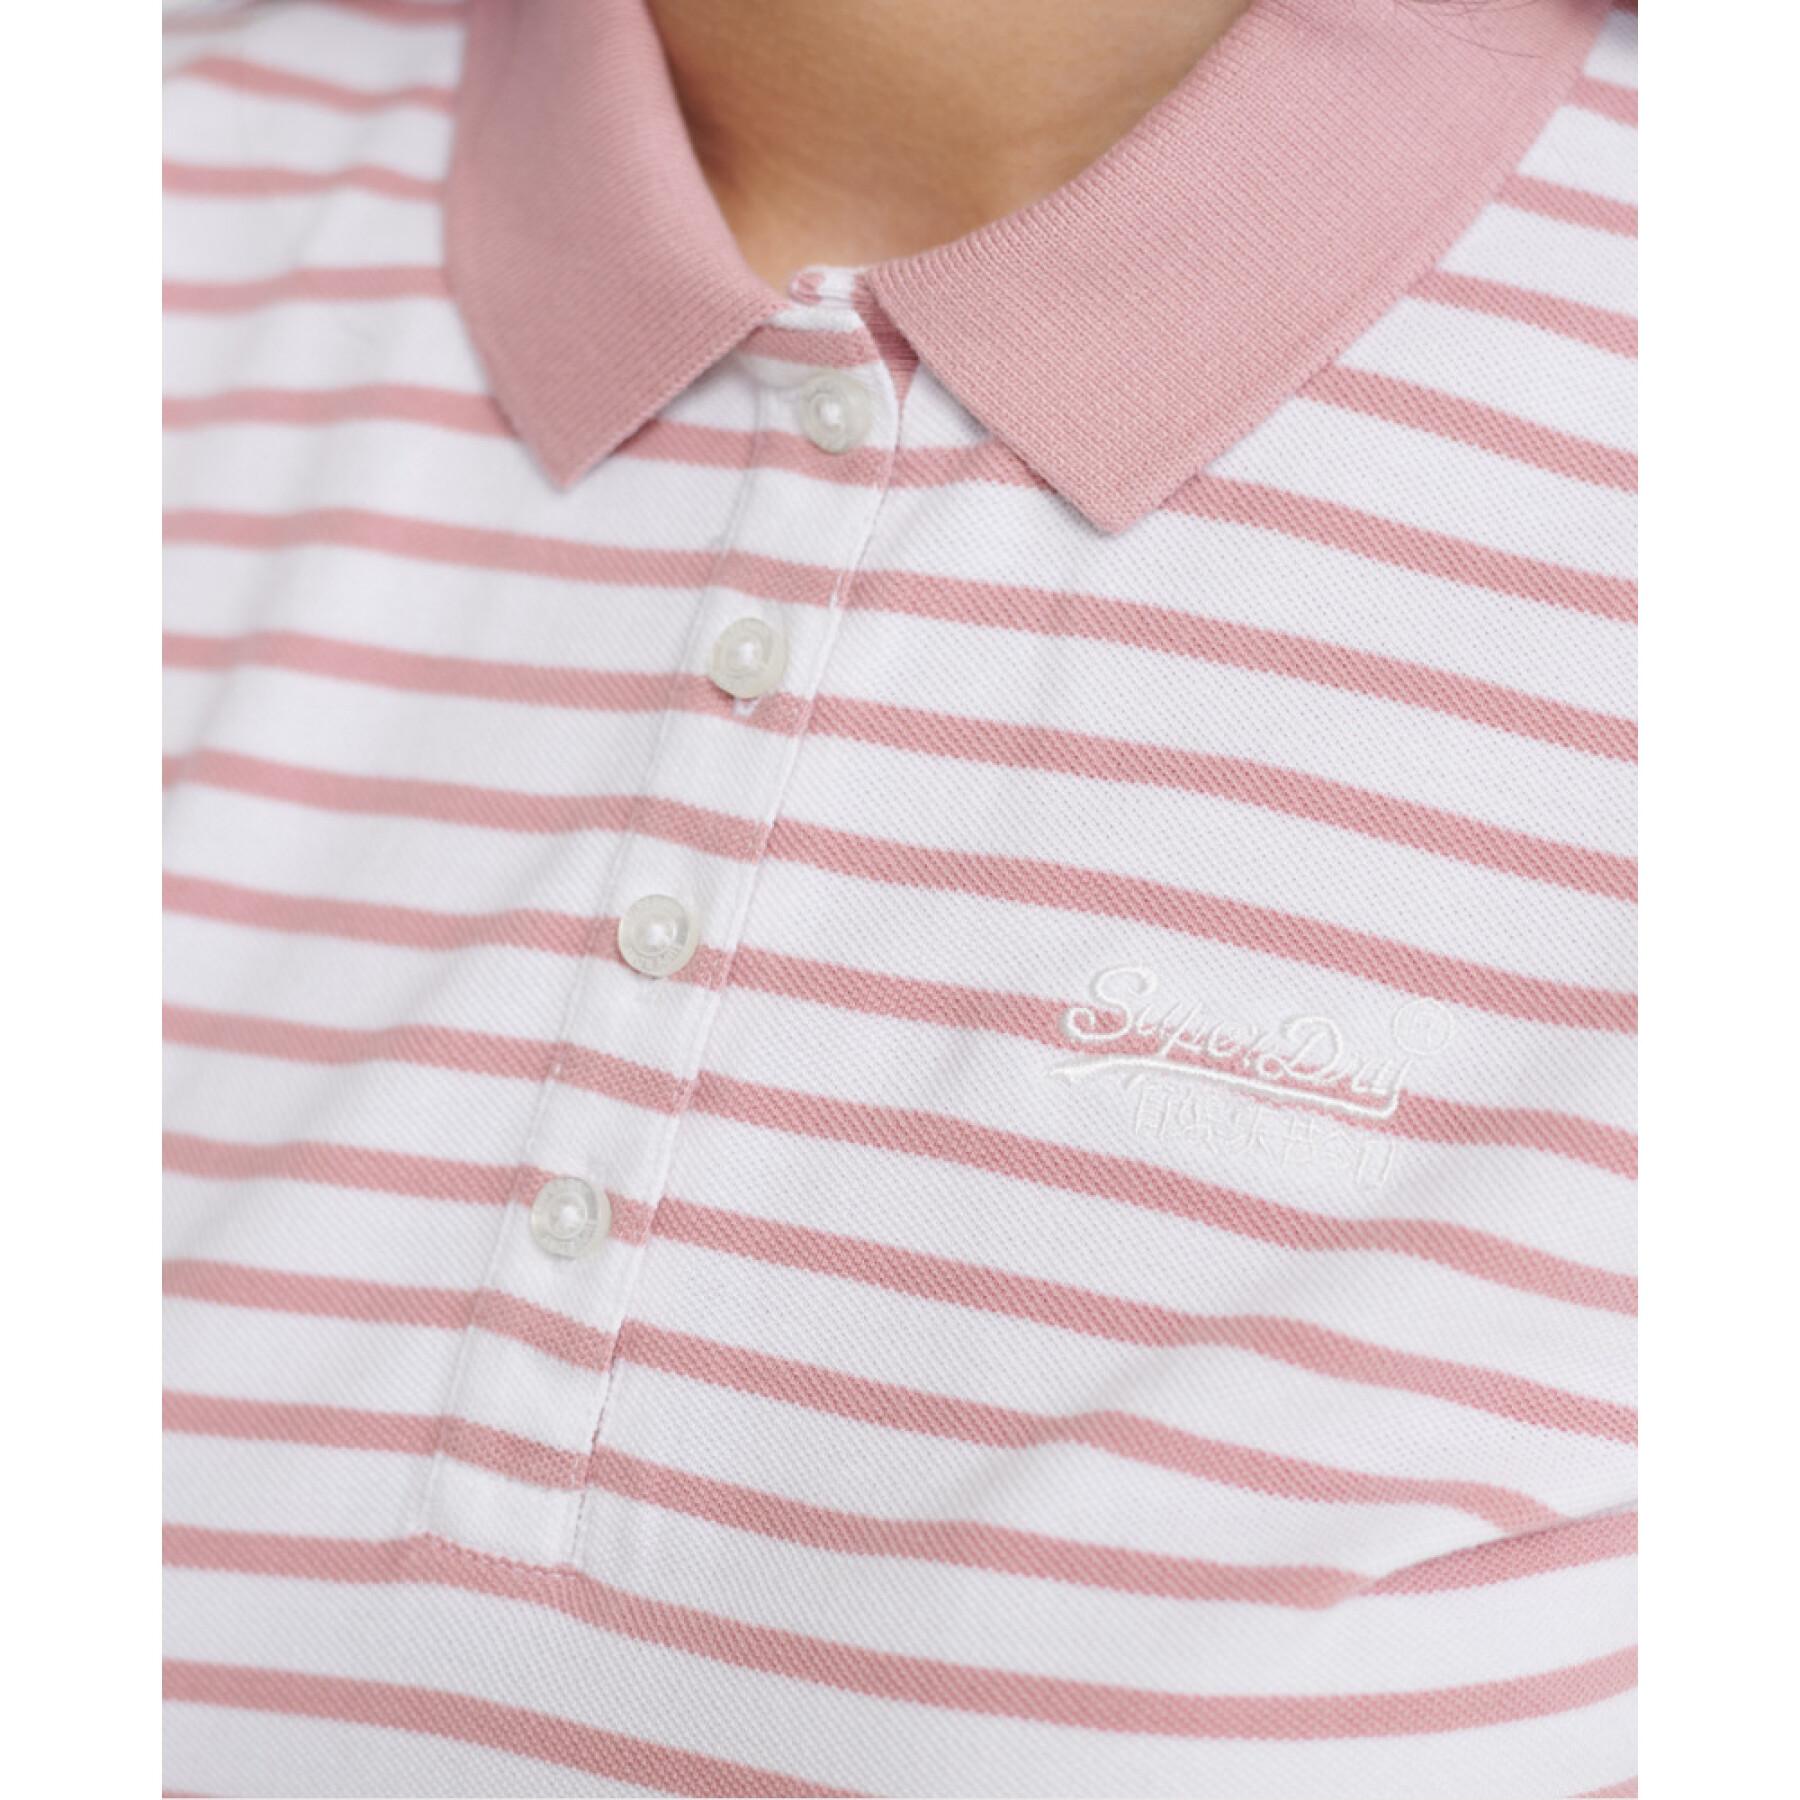 Striped polo shirt for women Superdry